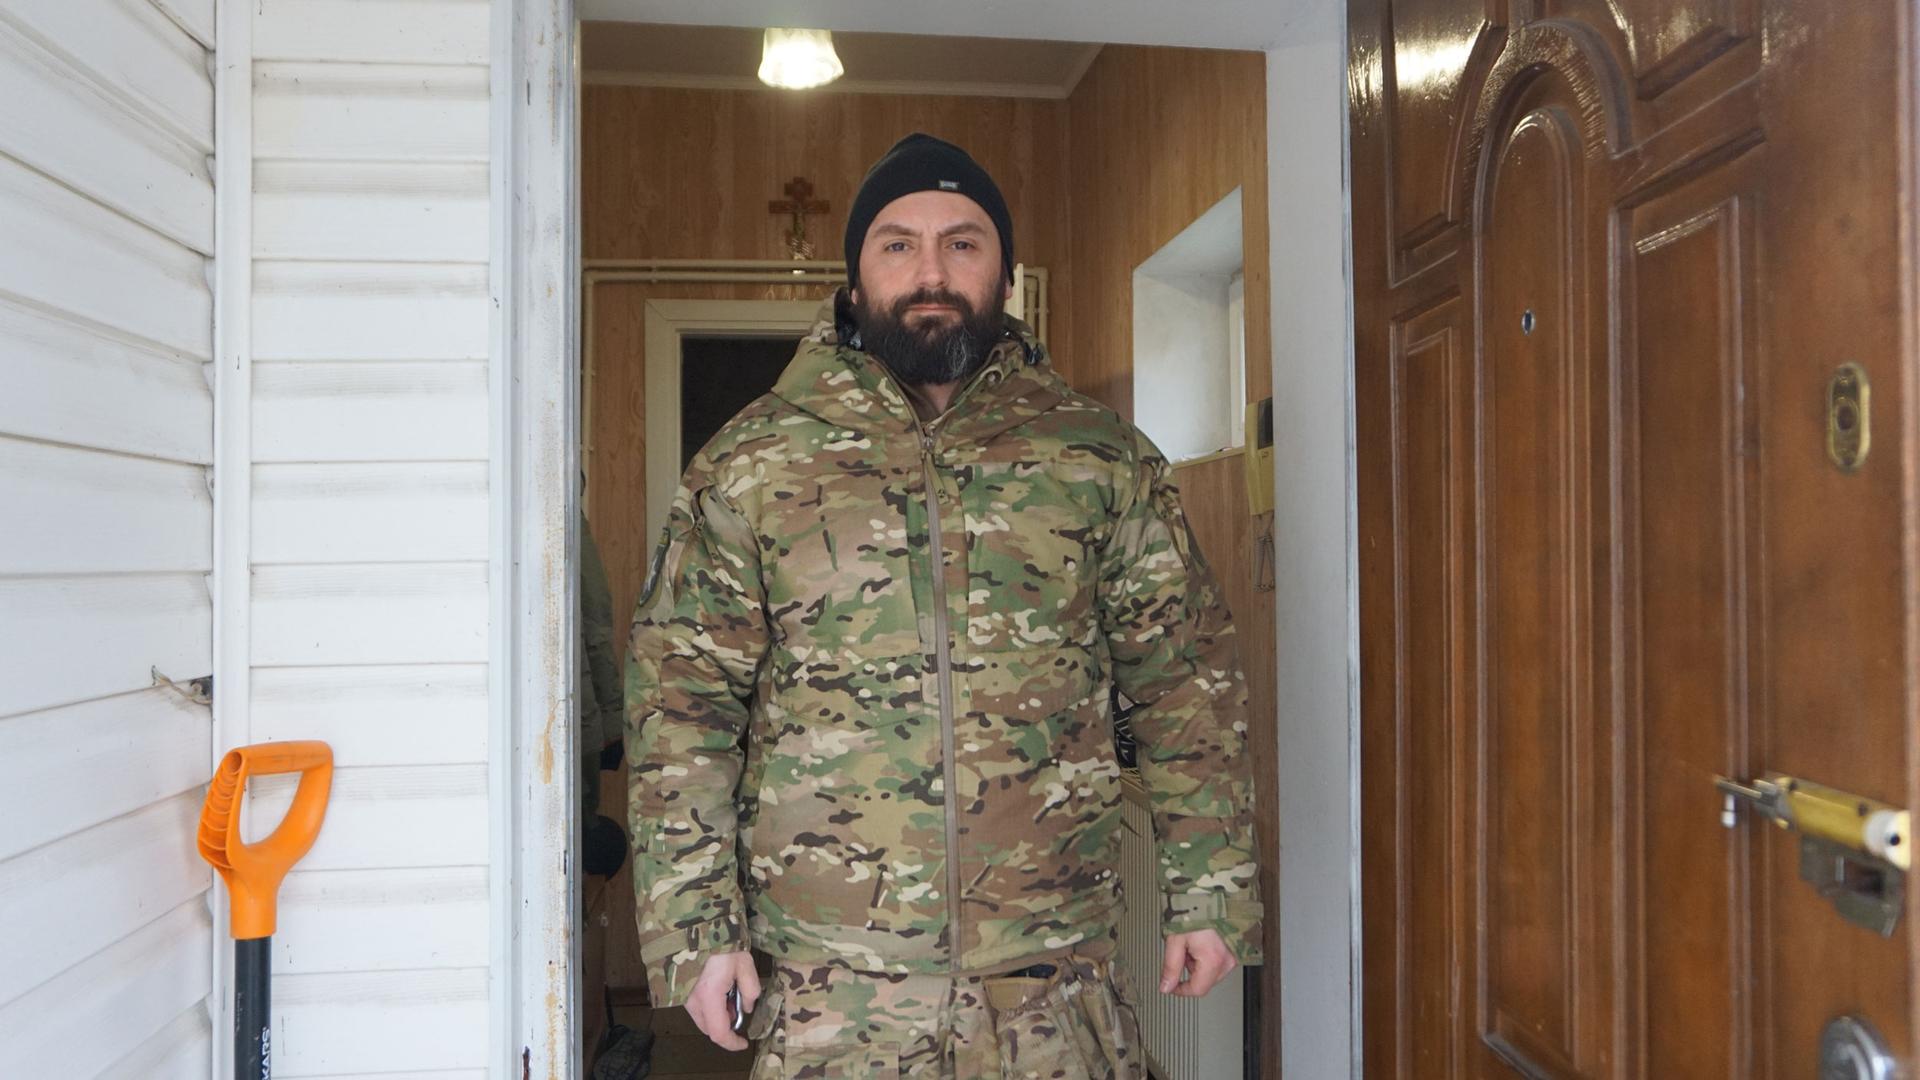 Leonid Ostalsev, 35, is serving in Ukraine’s patrol police, which works closely with Ukraine’s military. 